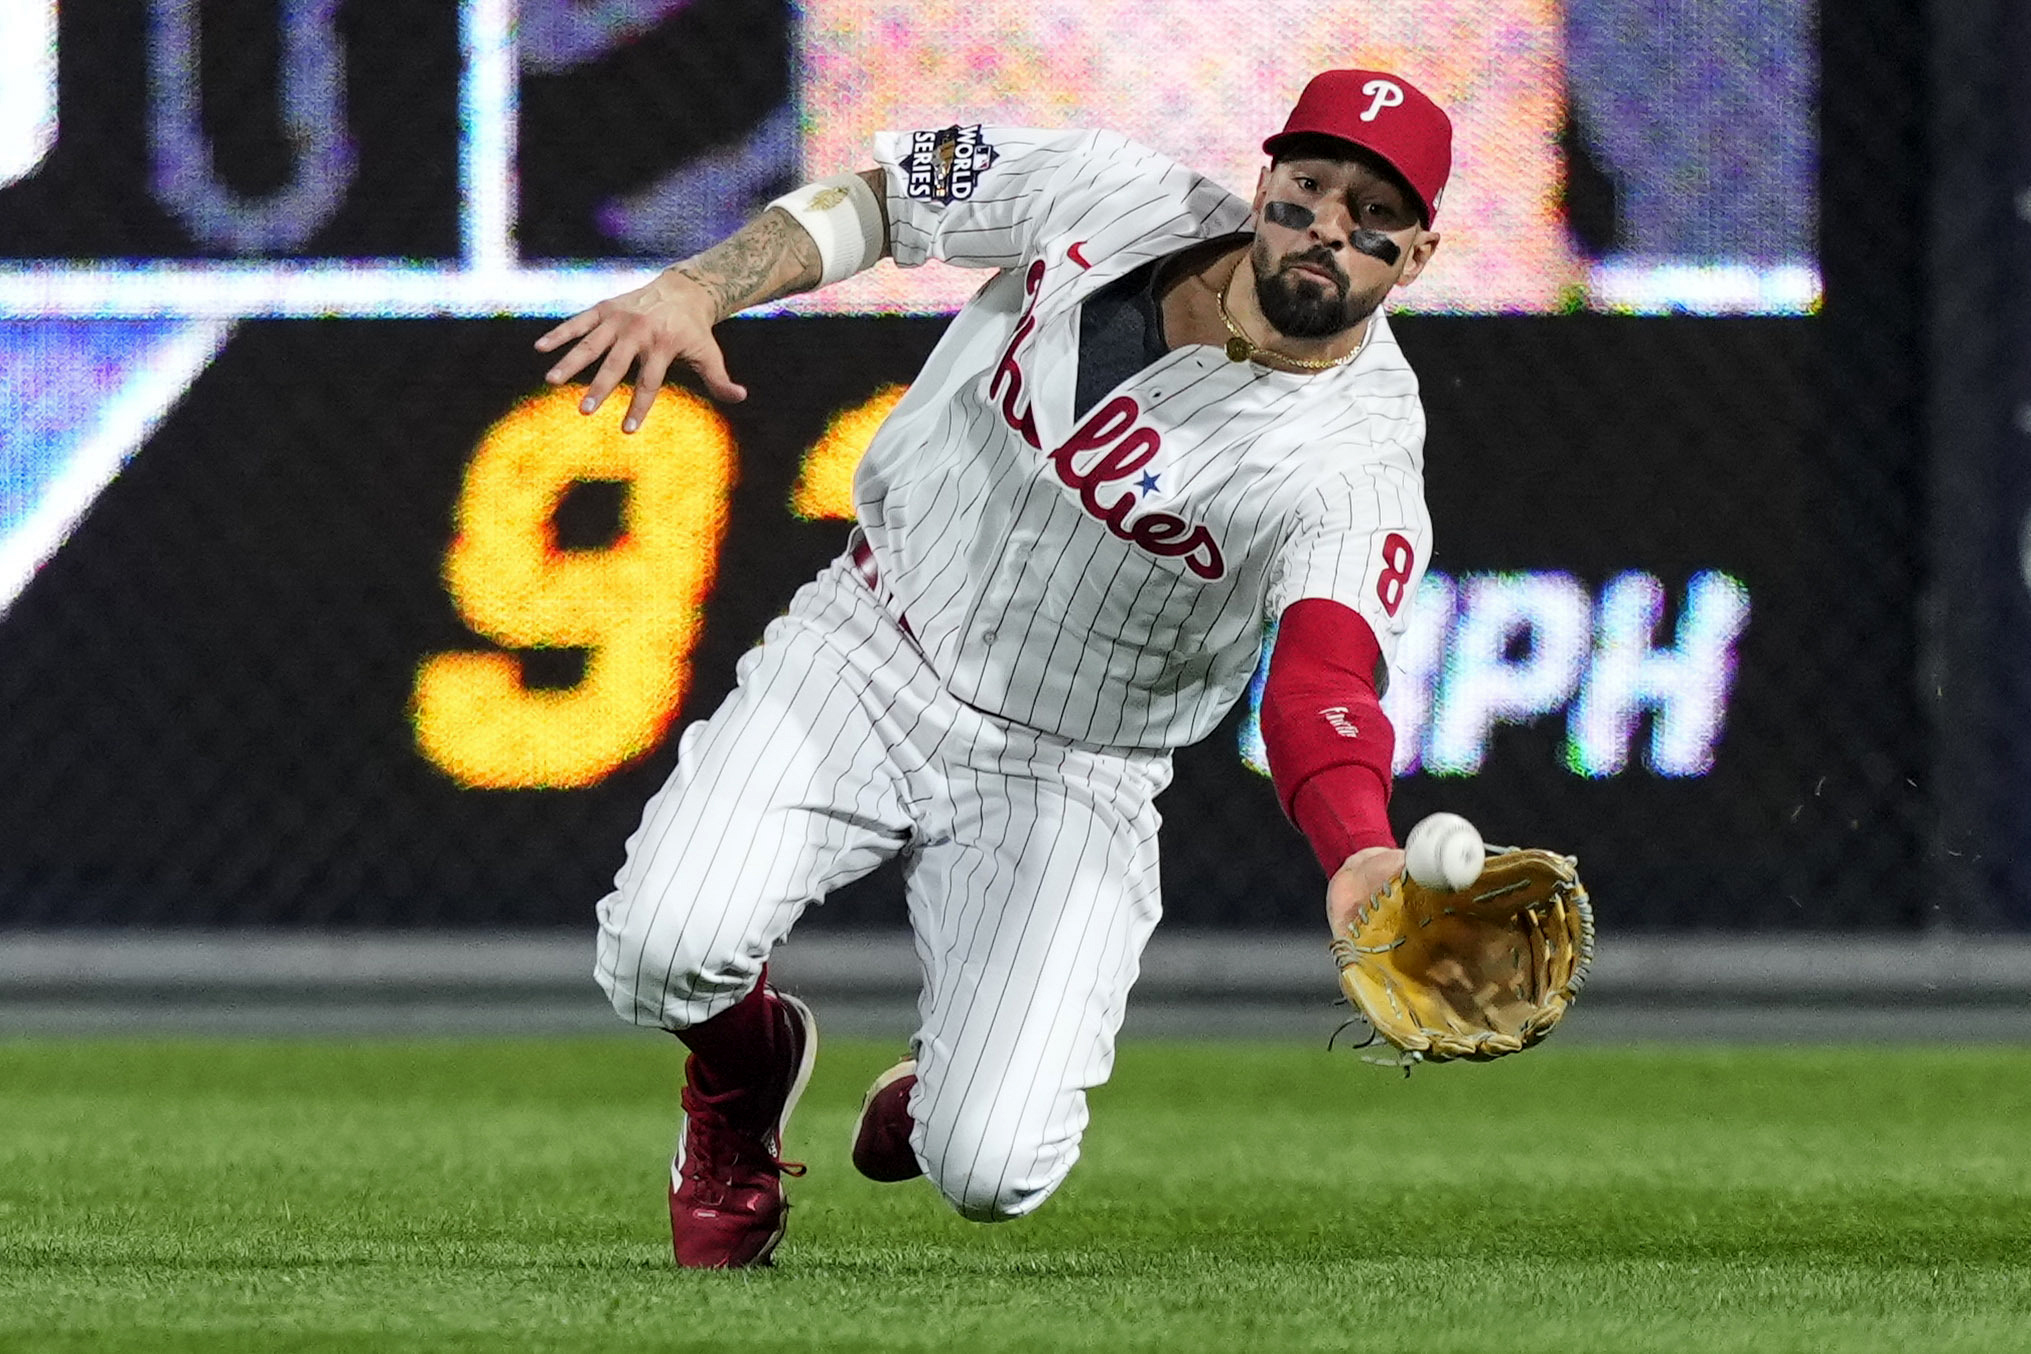 Philadelphia Phillies right fielder Nick Castellanos makes a diving catch during Game 3 of the 2022 World Series.